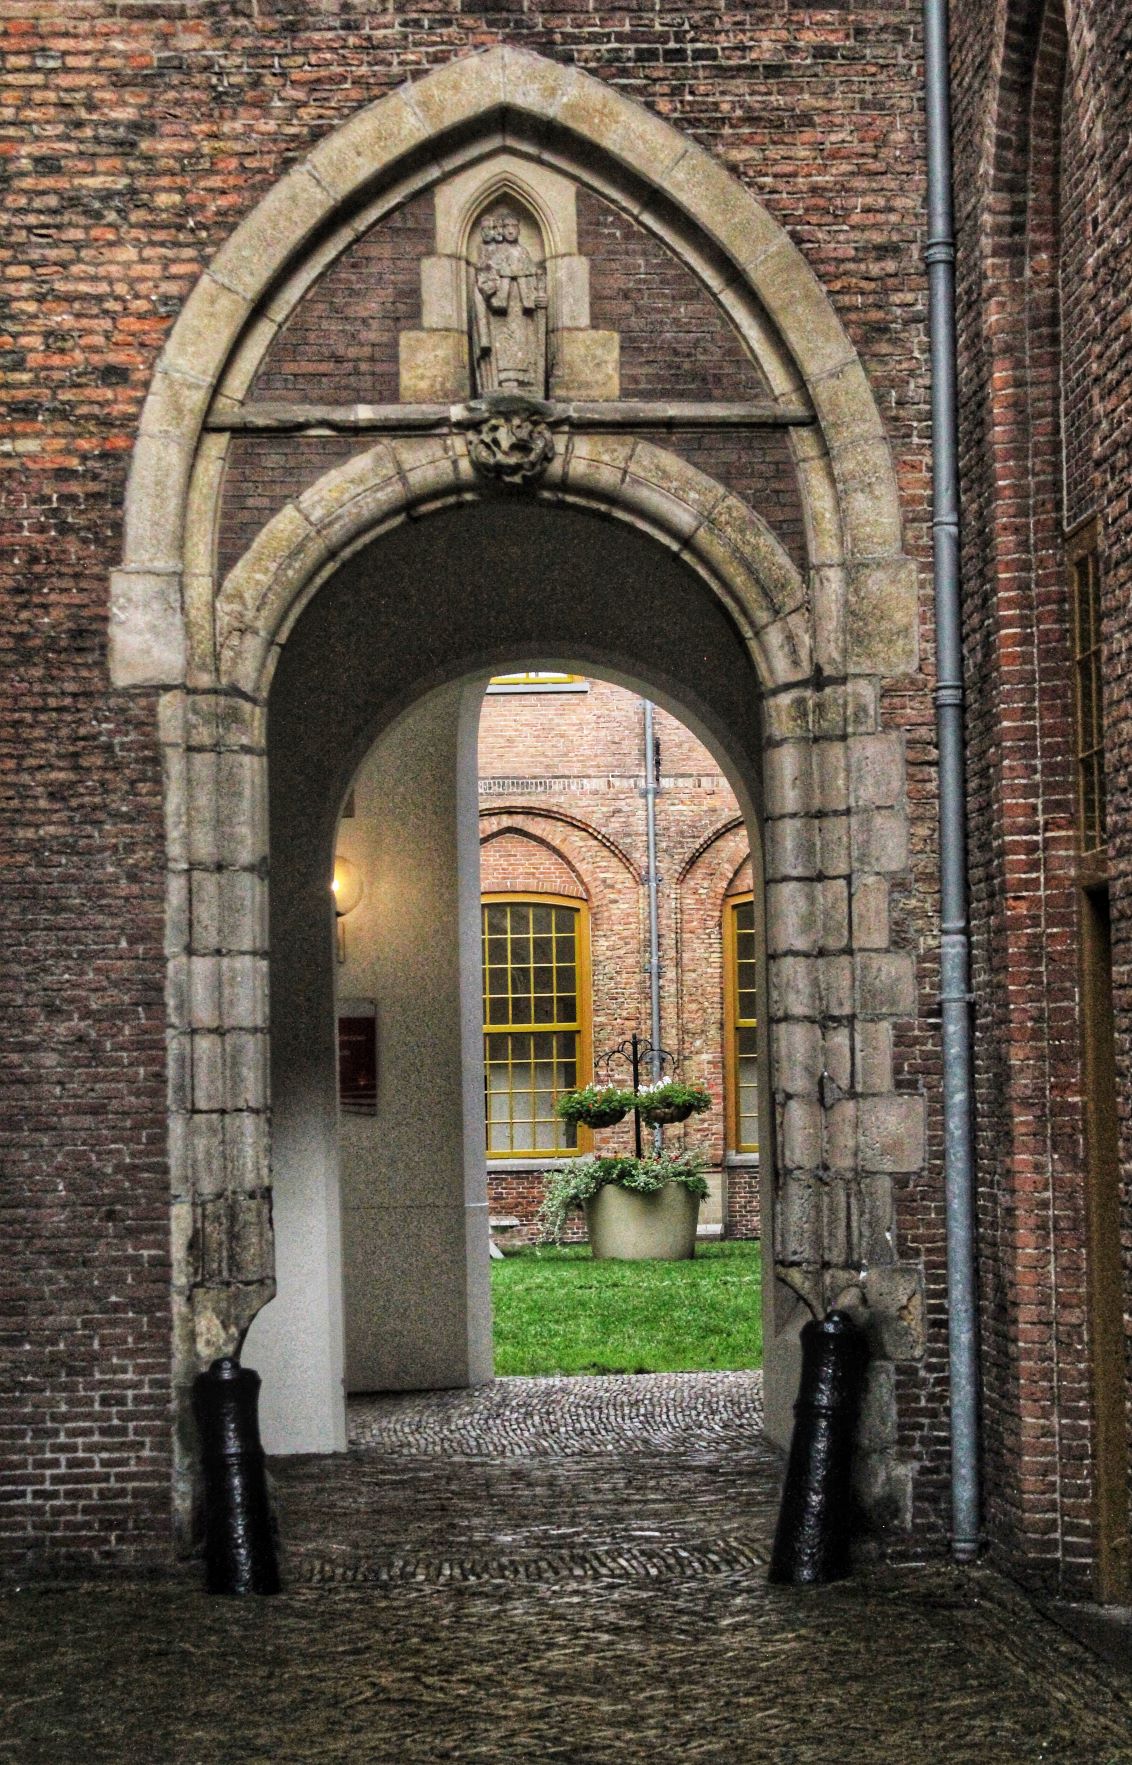 stone archway with garden